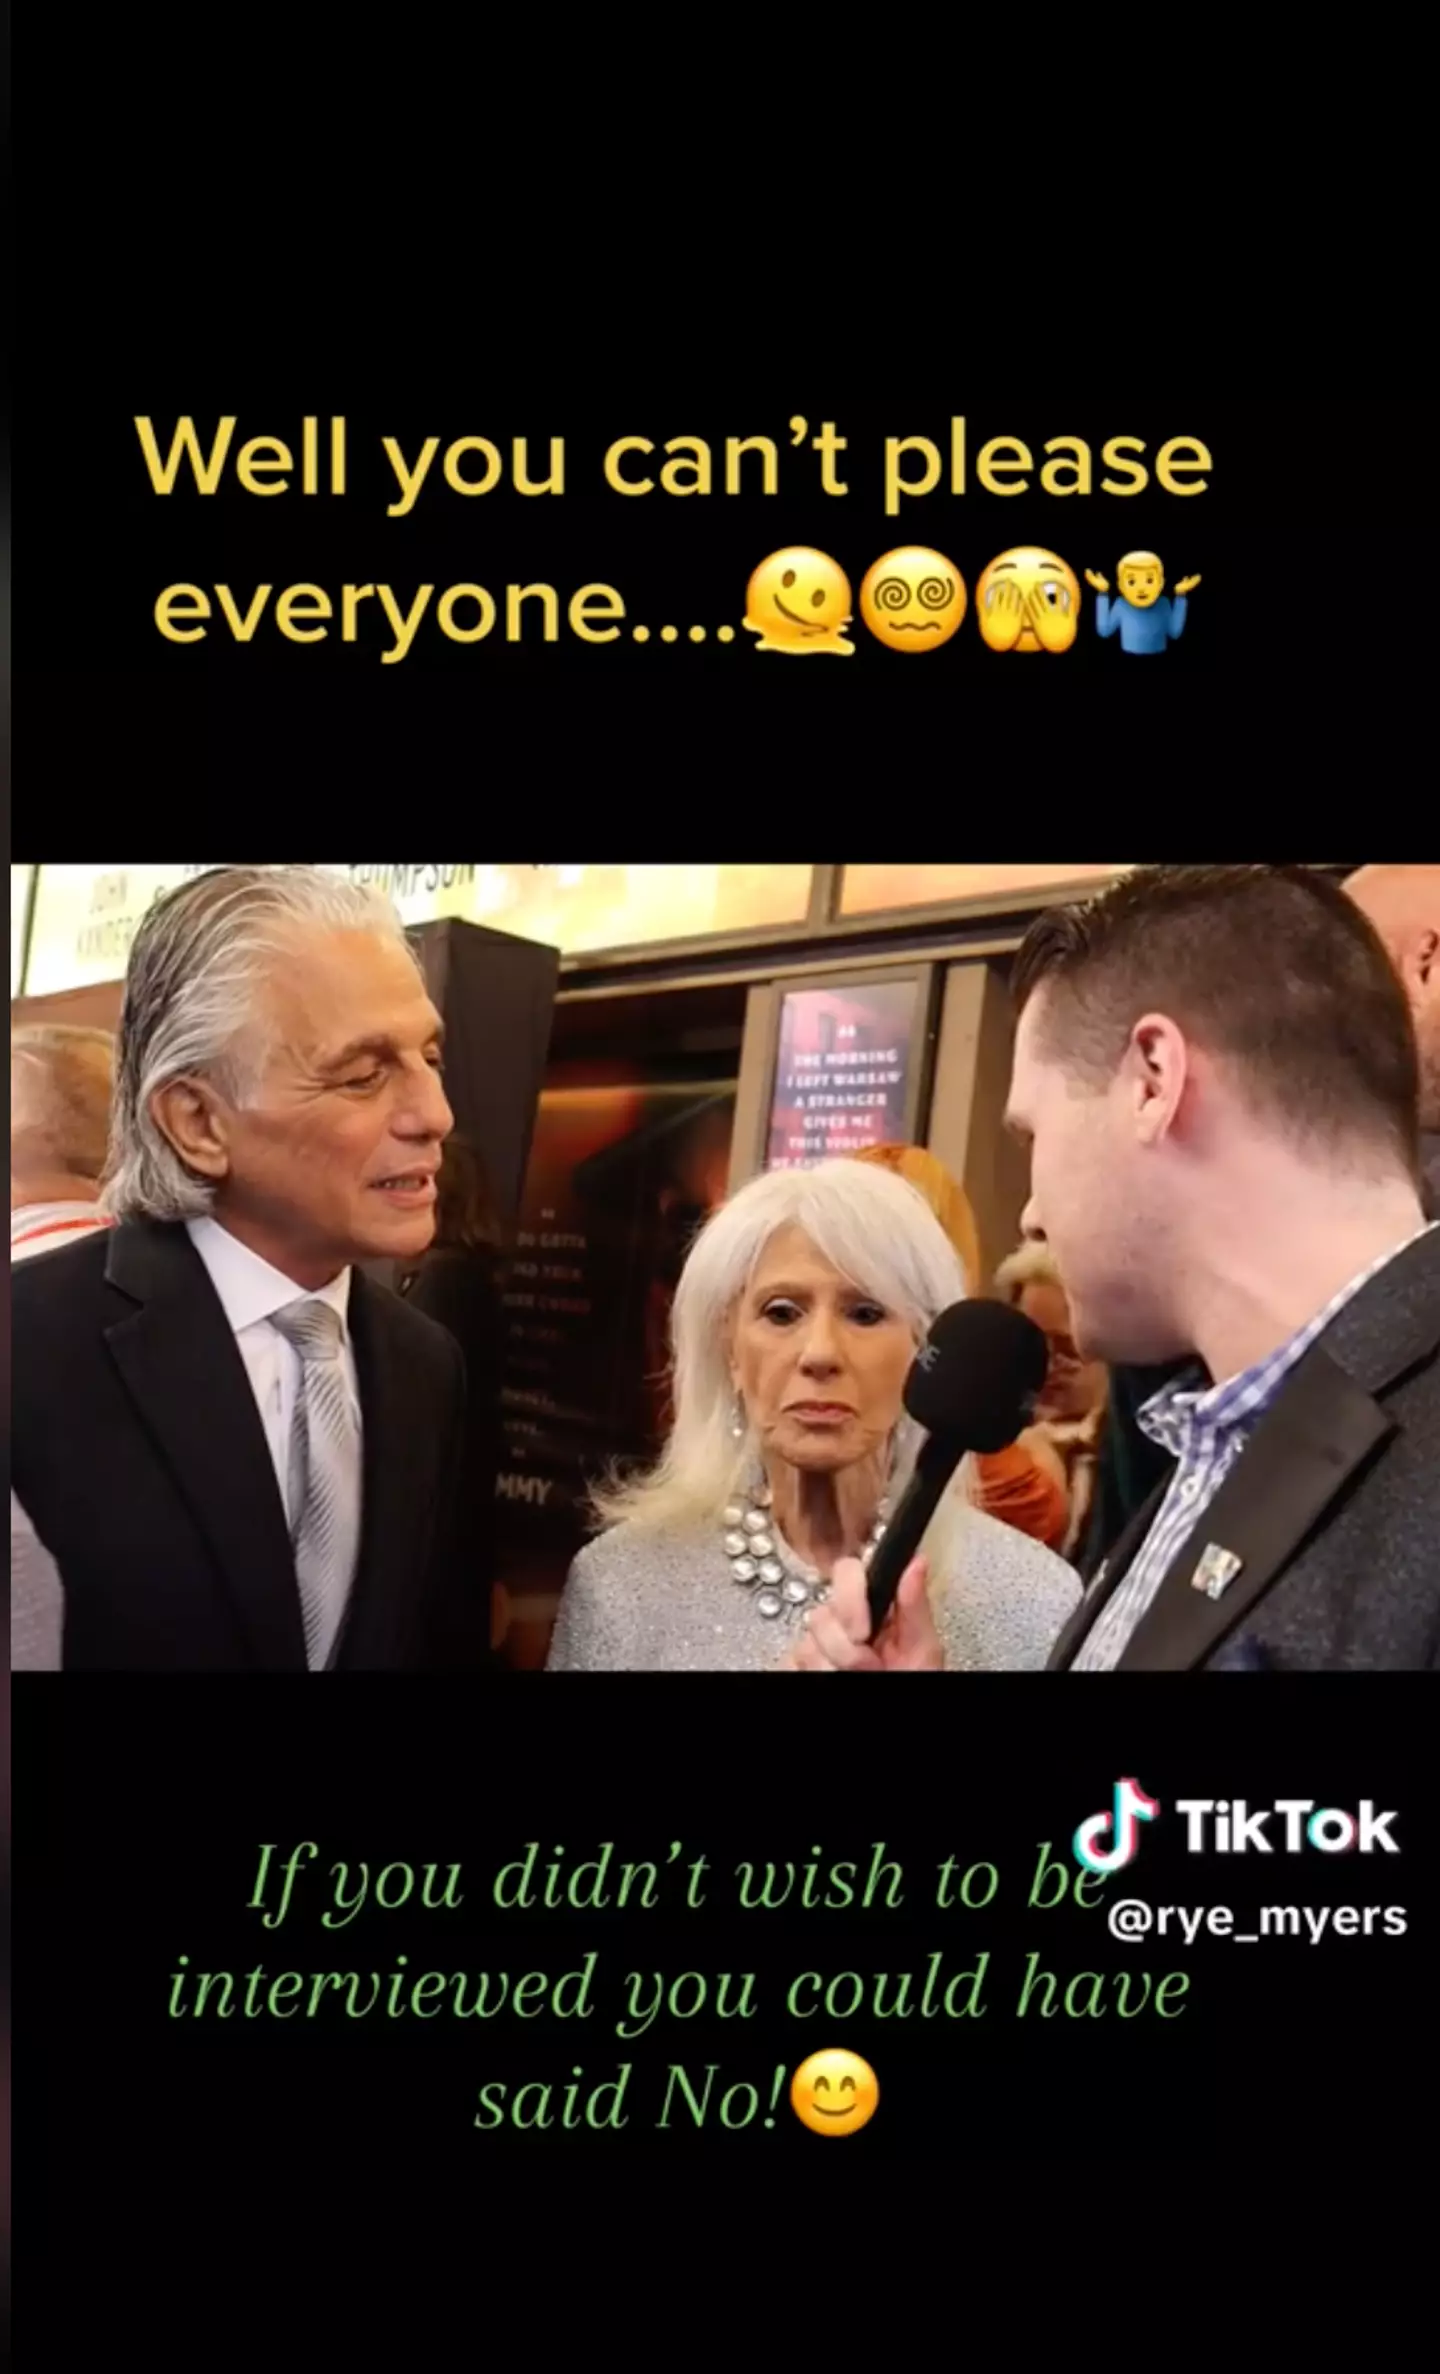 Ryan Myers posted the interview to TikTok.